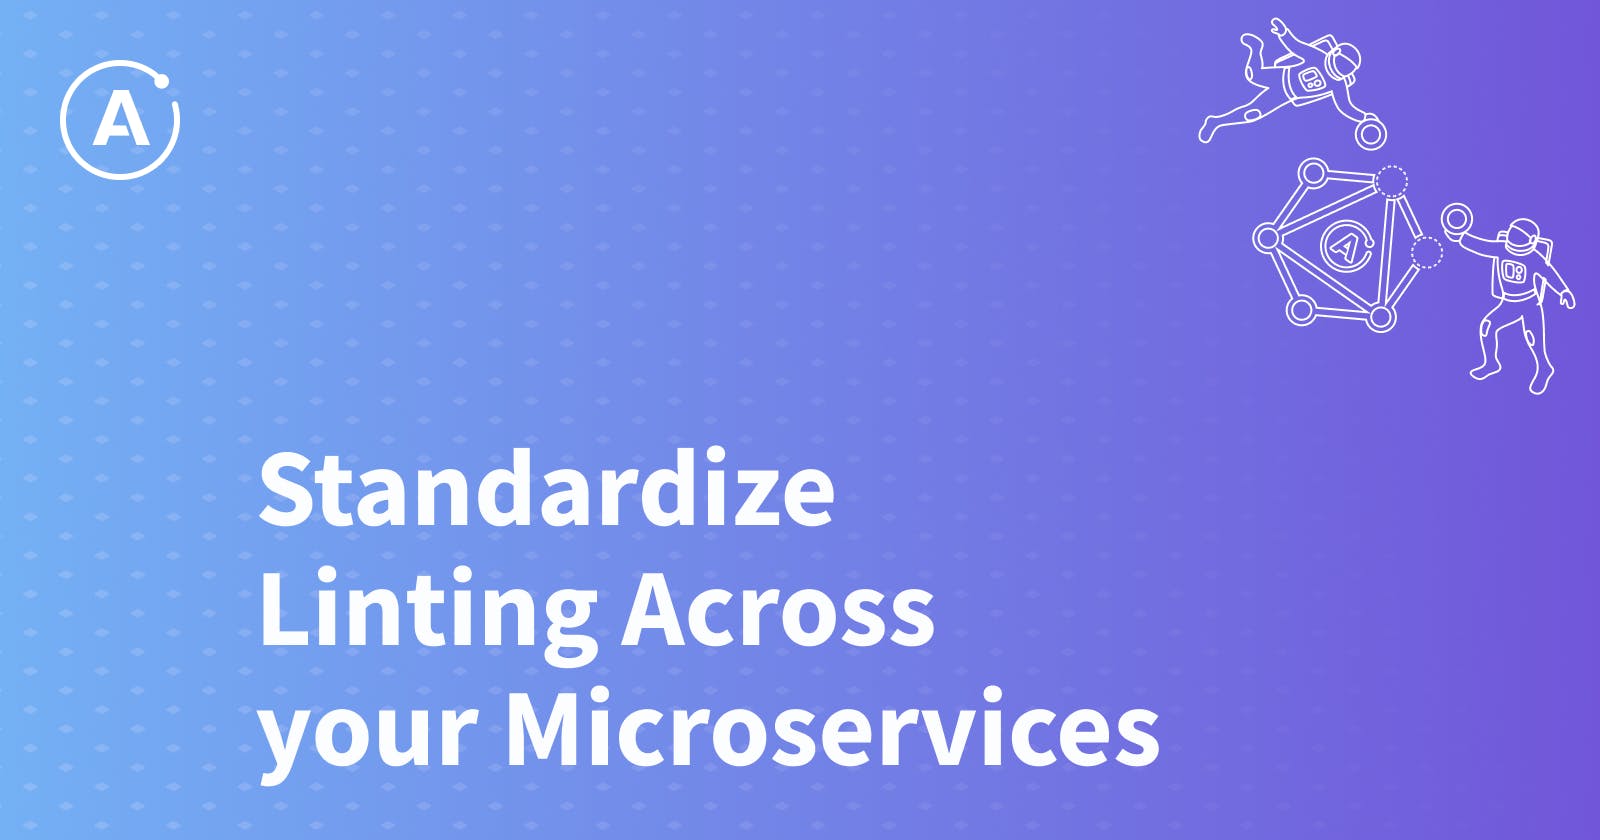 Standardize Linting Across your Microservices